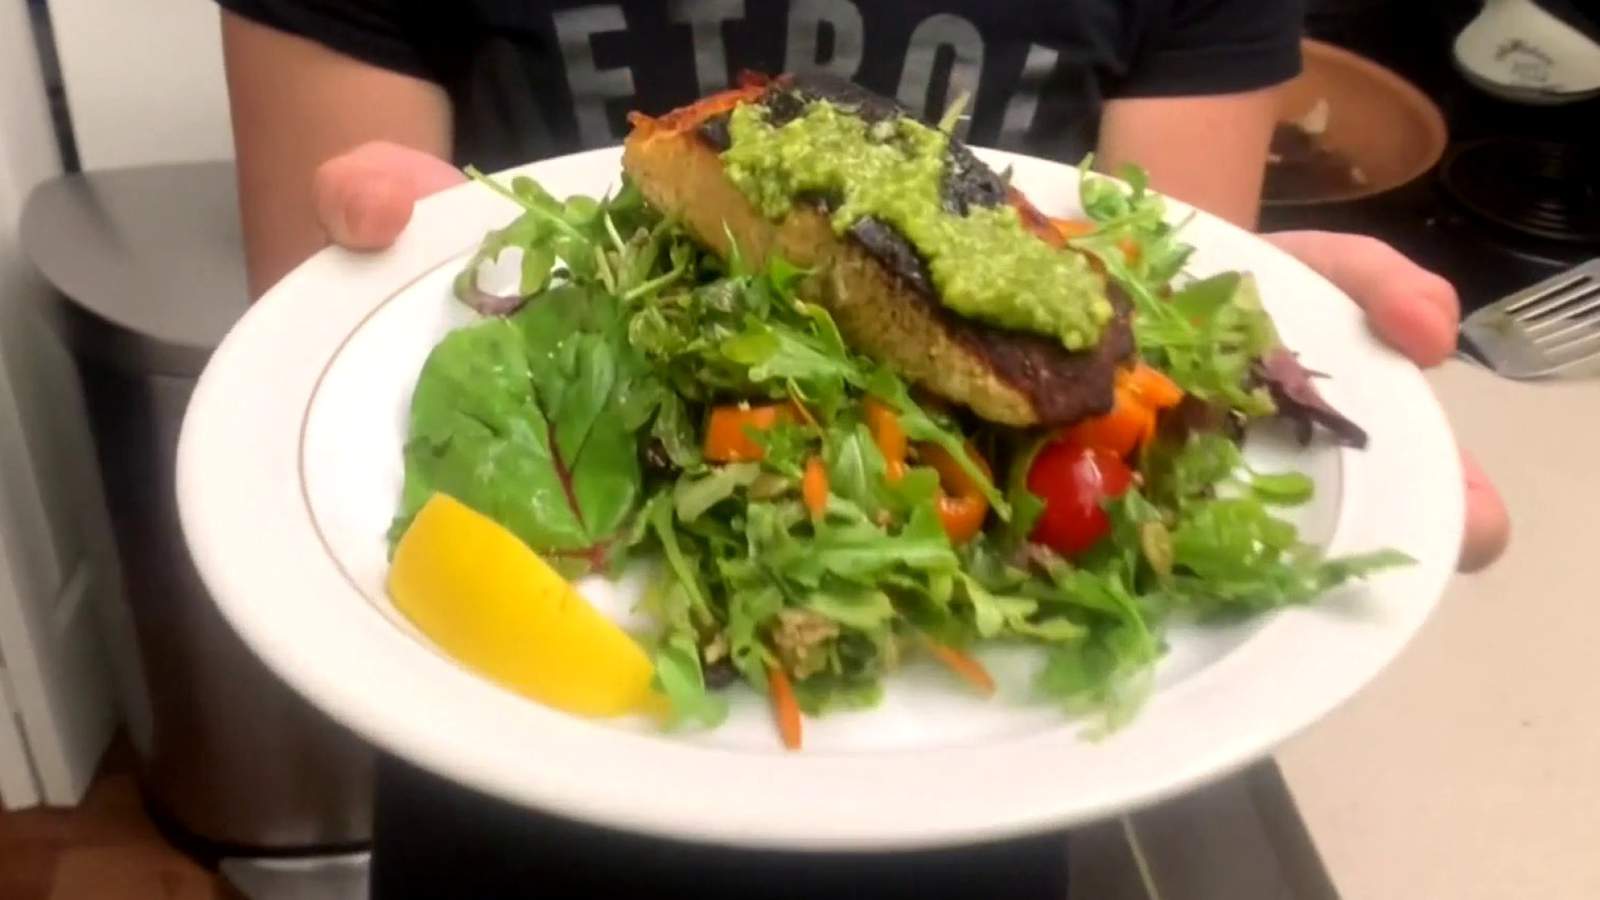 Tasty Tuesday recipe: Grilled salmon with arugala salad